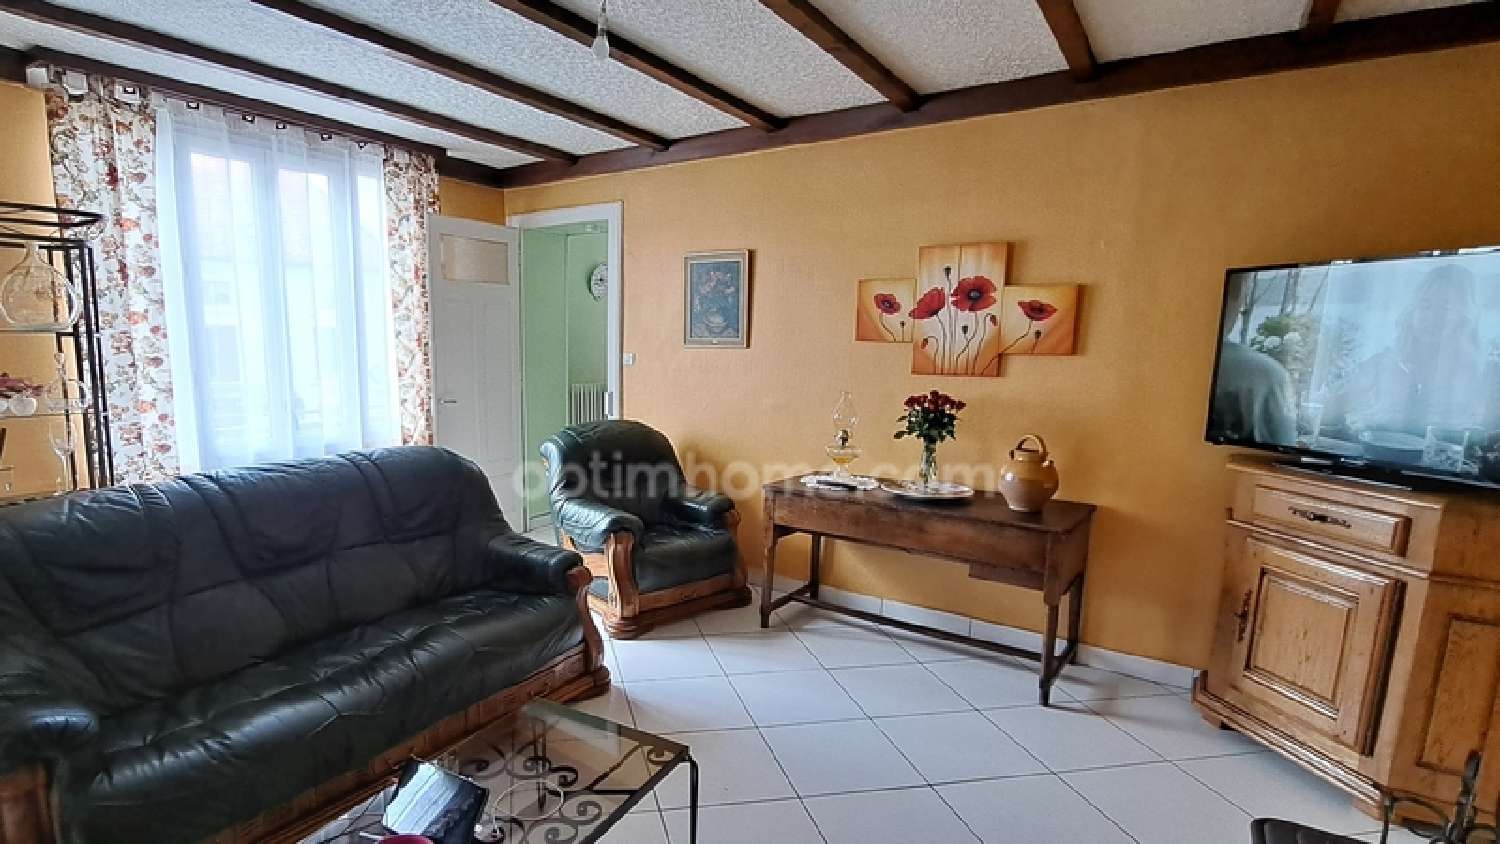  for sale house Vauvillers Haute-Saône 2